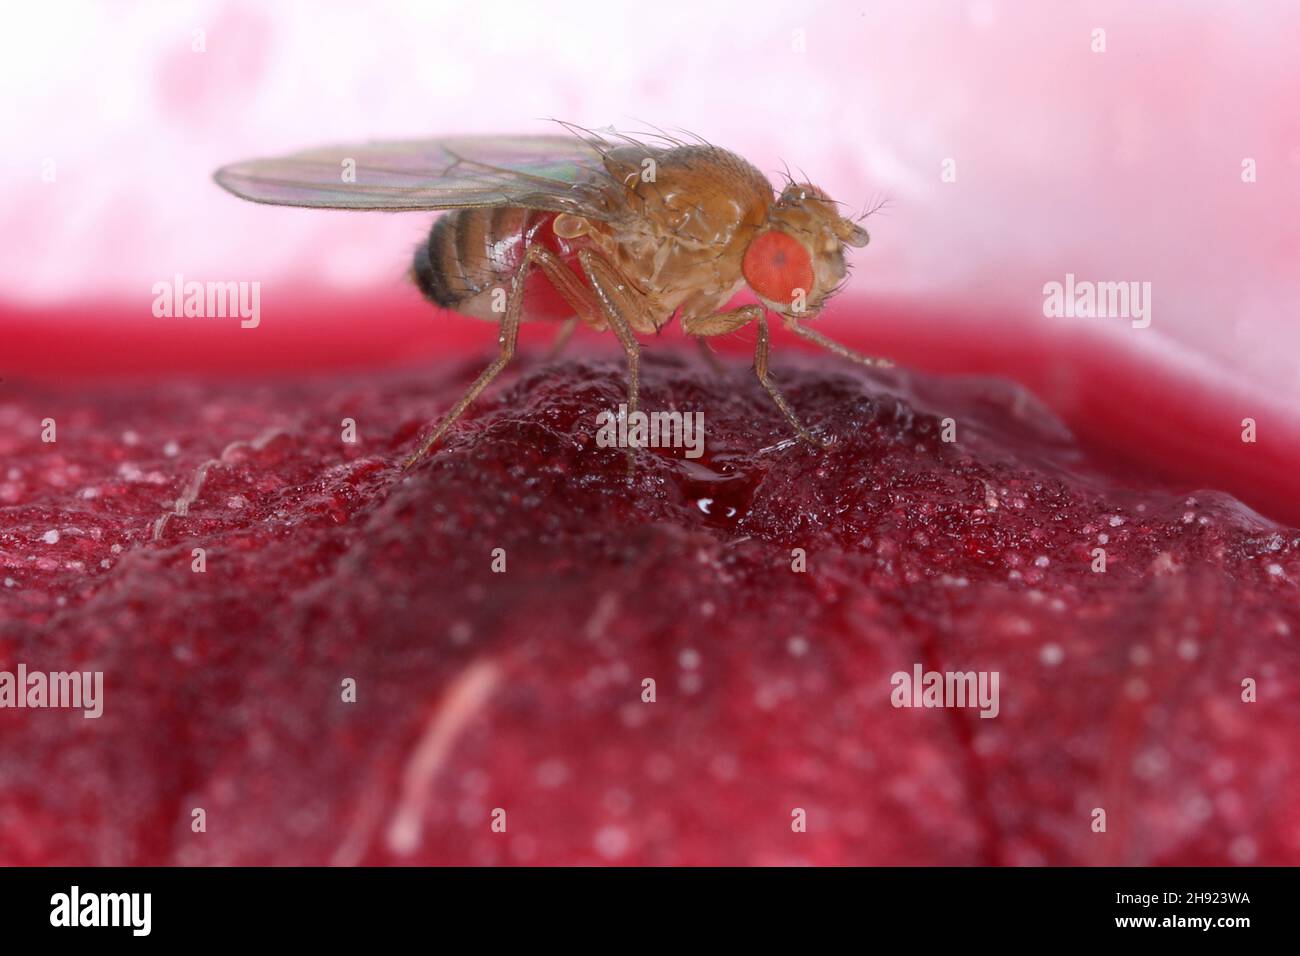 common fruit fly or vinegar fly Drosophila melanogaster is a species of fly in the family Drosophilidae. It is pest of fruits and food made from fruit Stock Photo